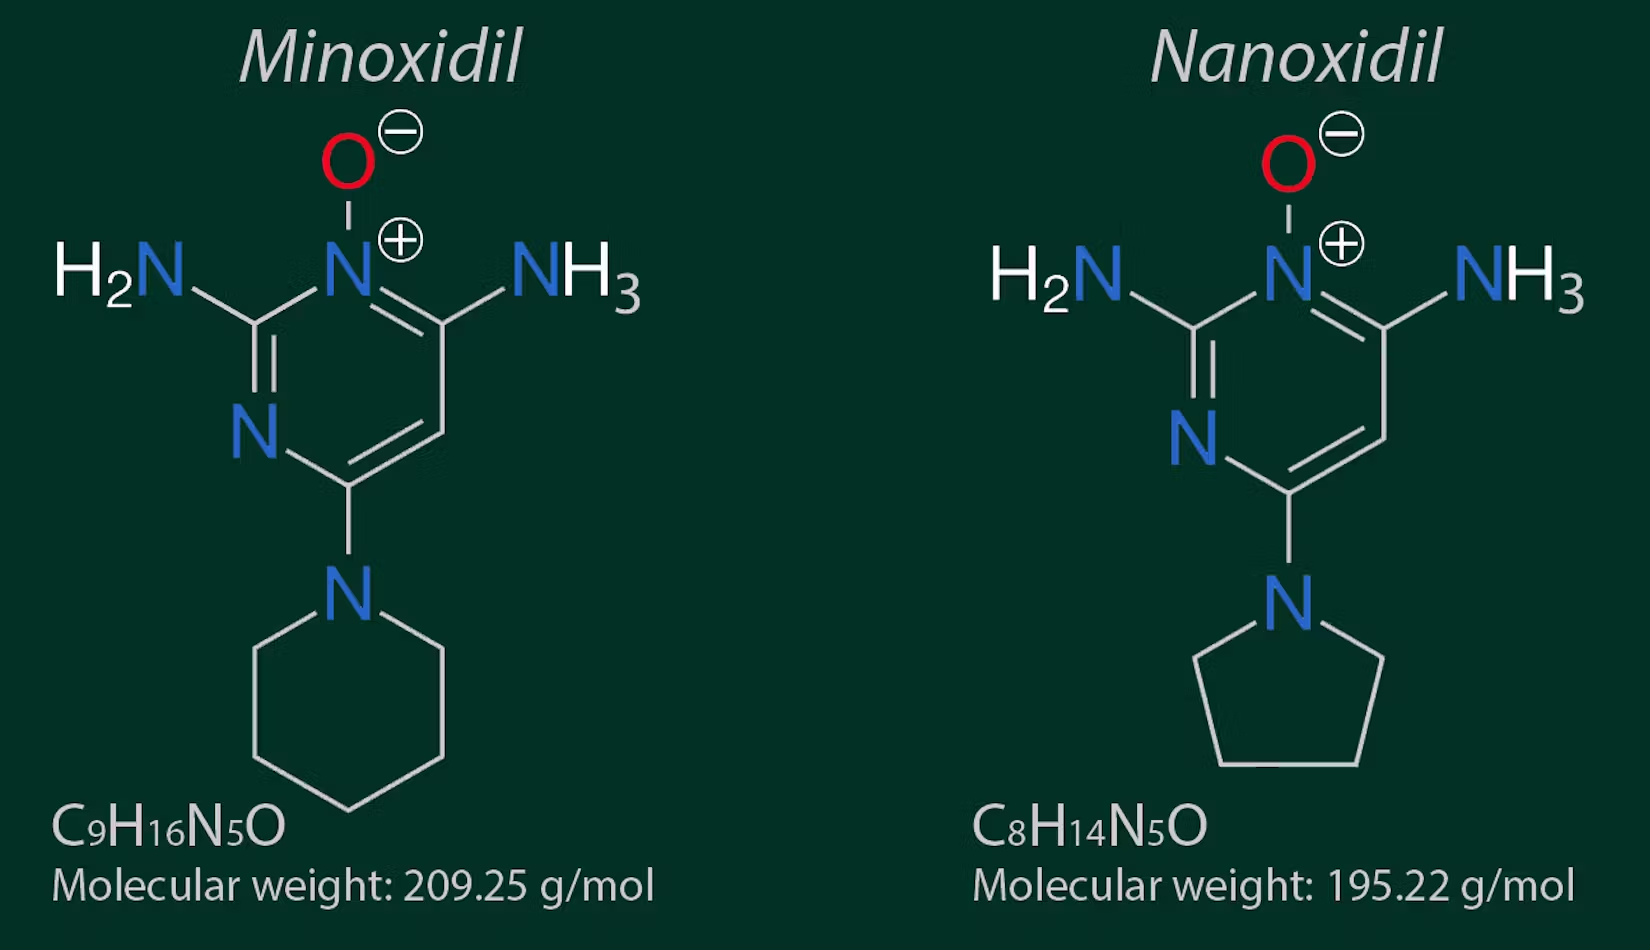 Chemical composition of Minoxidil and Nanoxidil